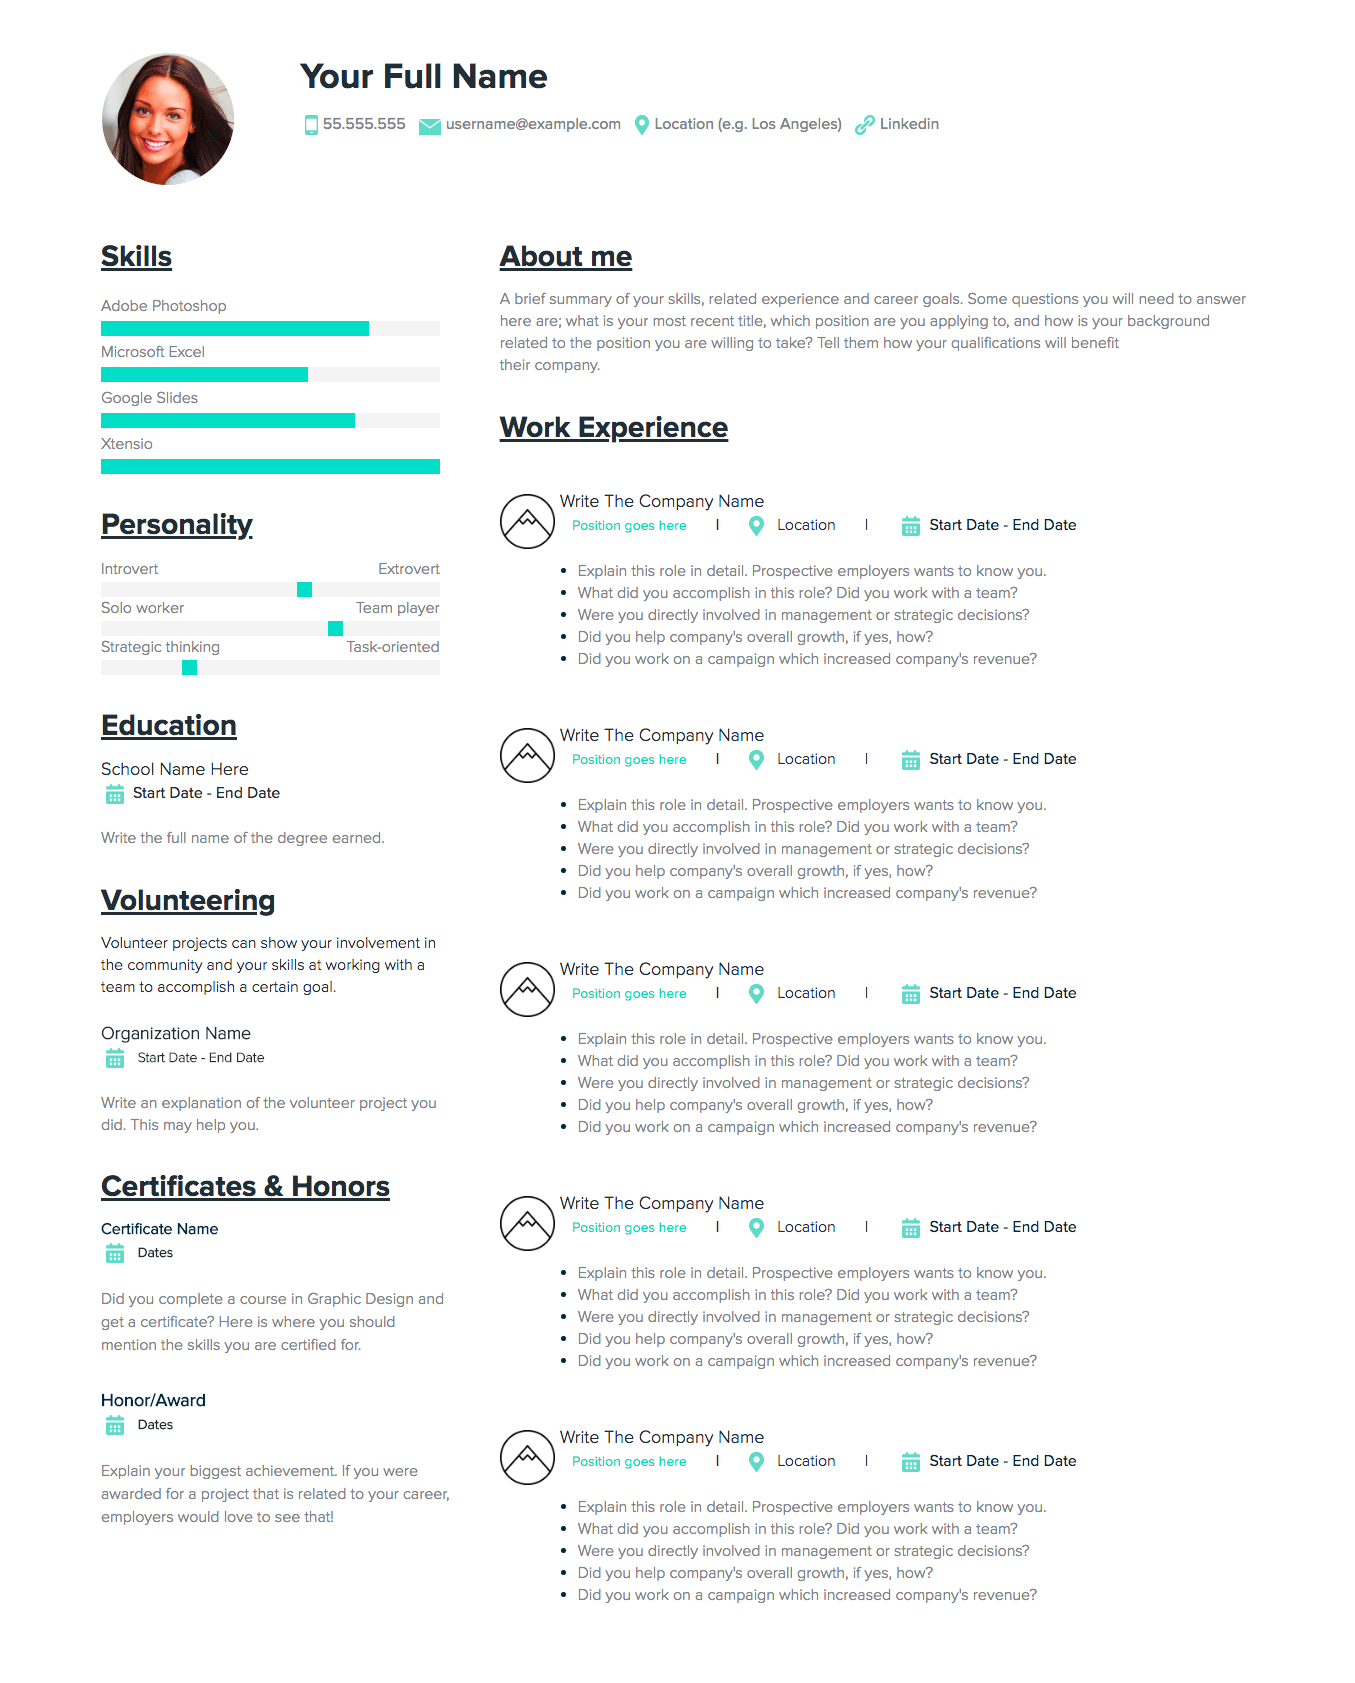 How to make a Resume, A step-by-step guide & samples | Xtensio